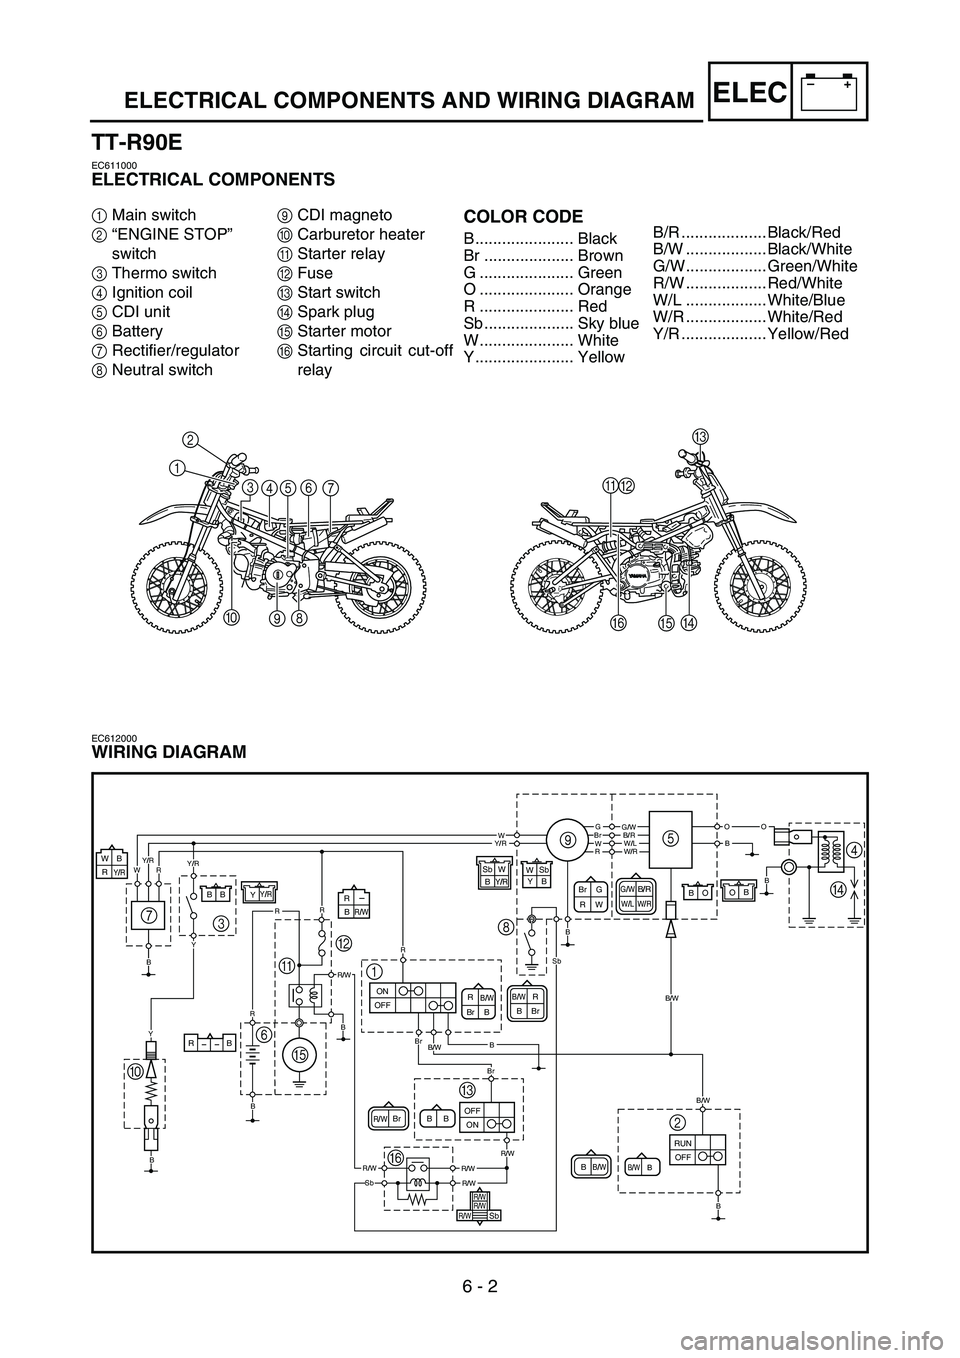 YAMAHA TTR90 2006  Owners Manual 6 - 2
–+ELEC
12
3
456
7
0
98
A
B
F
EC
D
ELECTRICAL COMPONENTS AND WIRING DIAGRAM
TT-R90E
EC611000
ELECTRICAL COMPONENTS
1Main switch
2“ENGINE STOP” 
switch
3Thermo switch
4Ignition coil
5CDI uni